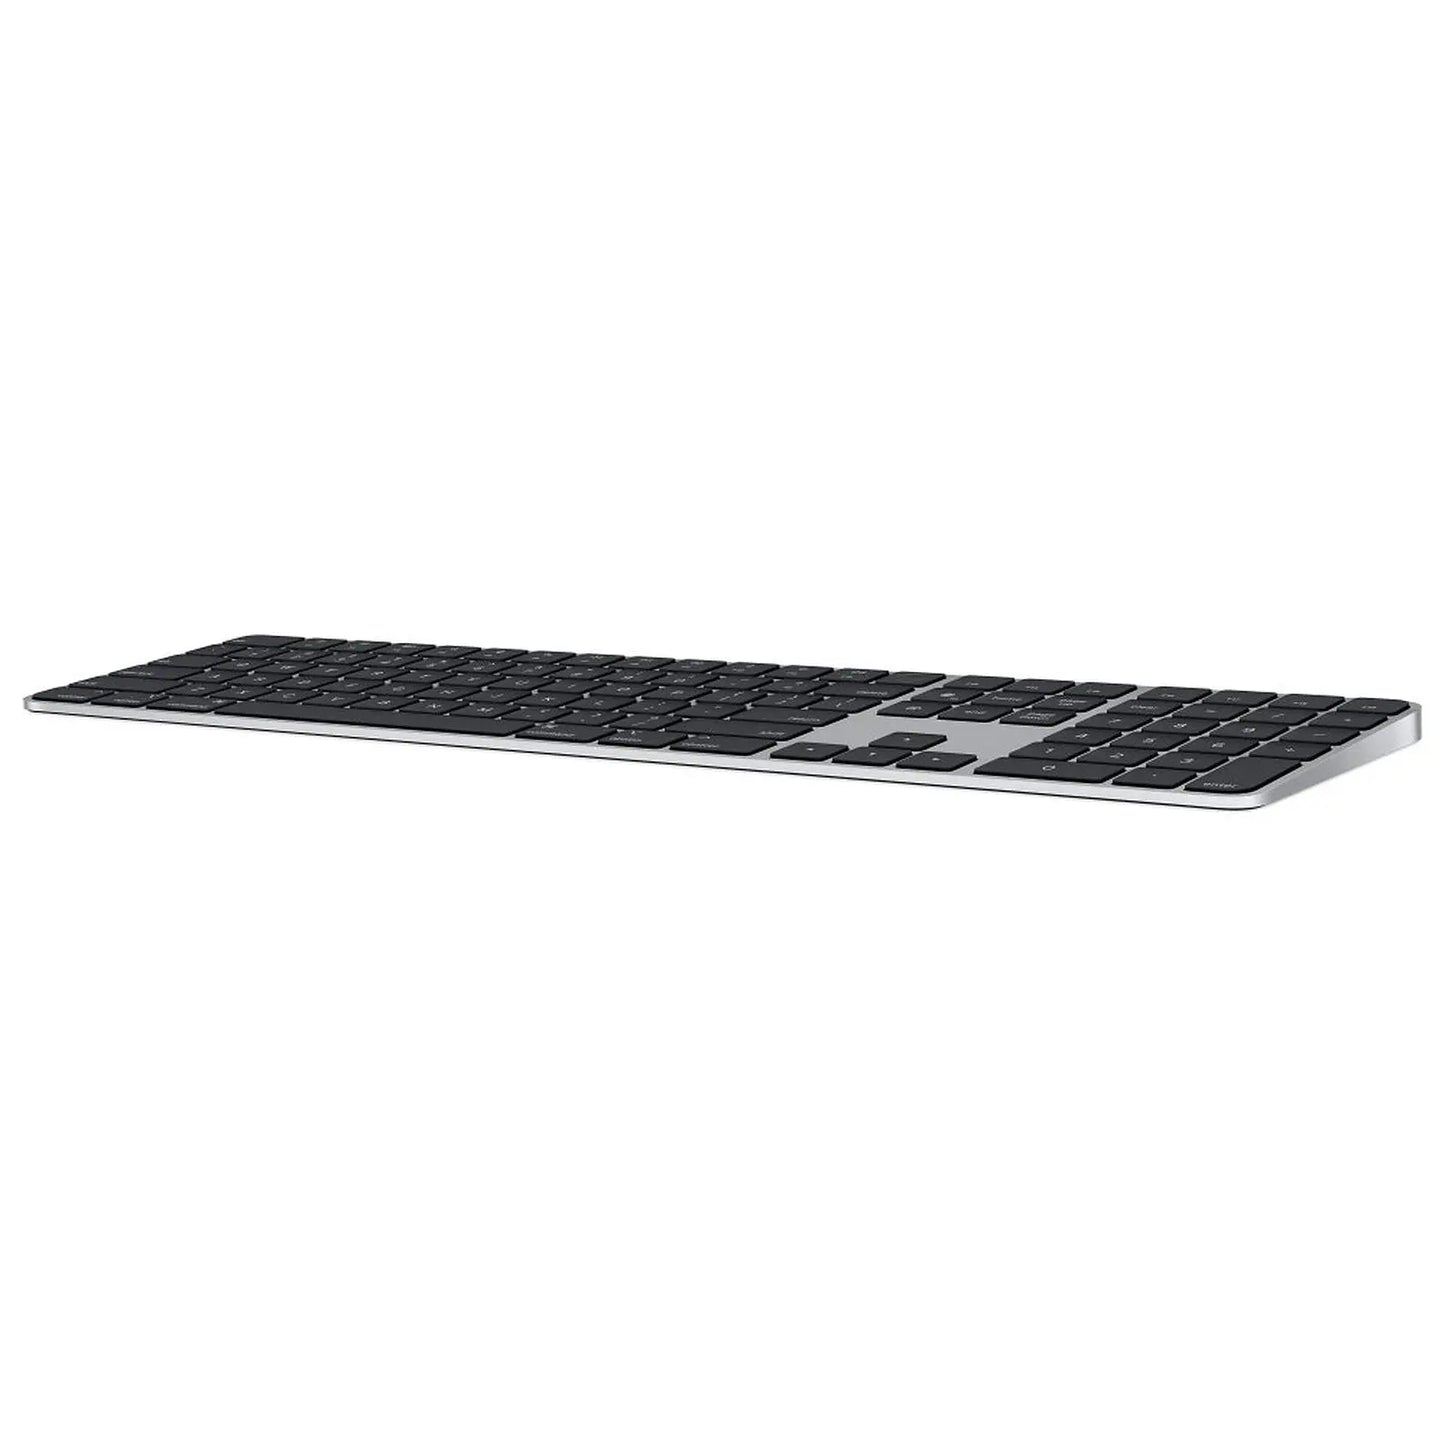 Apple Magic Keyboard with Touch ID and Numeric Keypad Black-ES (MMMR3Y/A) 0194252987452 APPLE